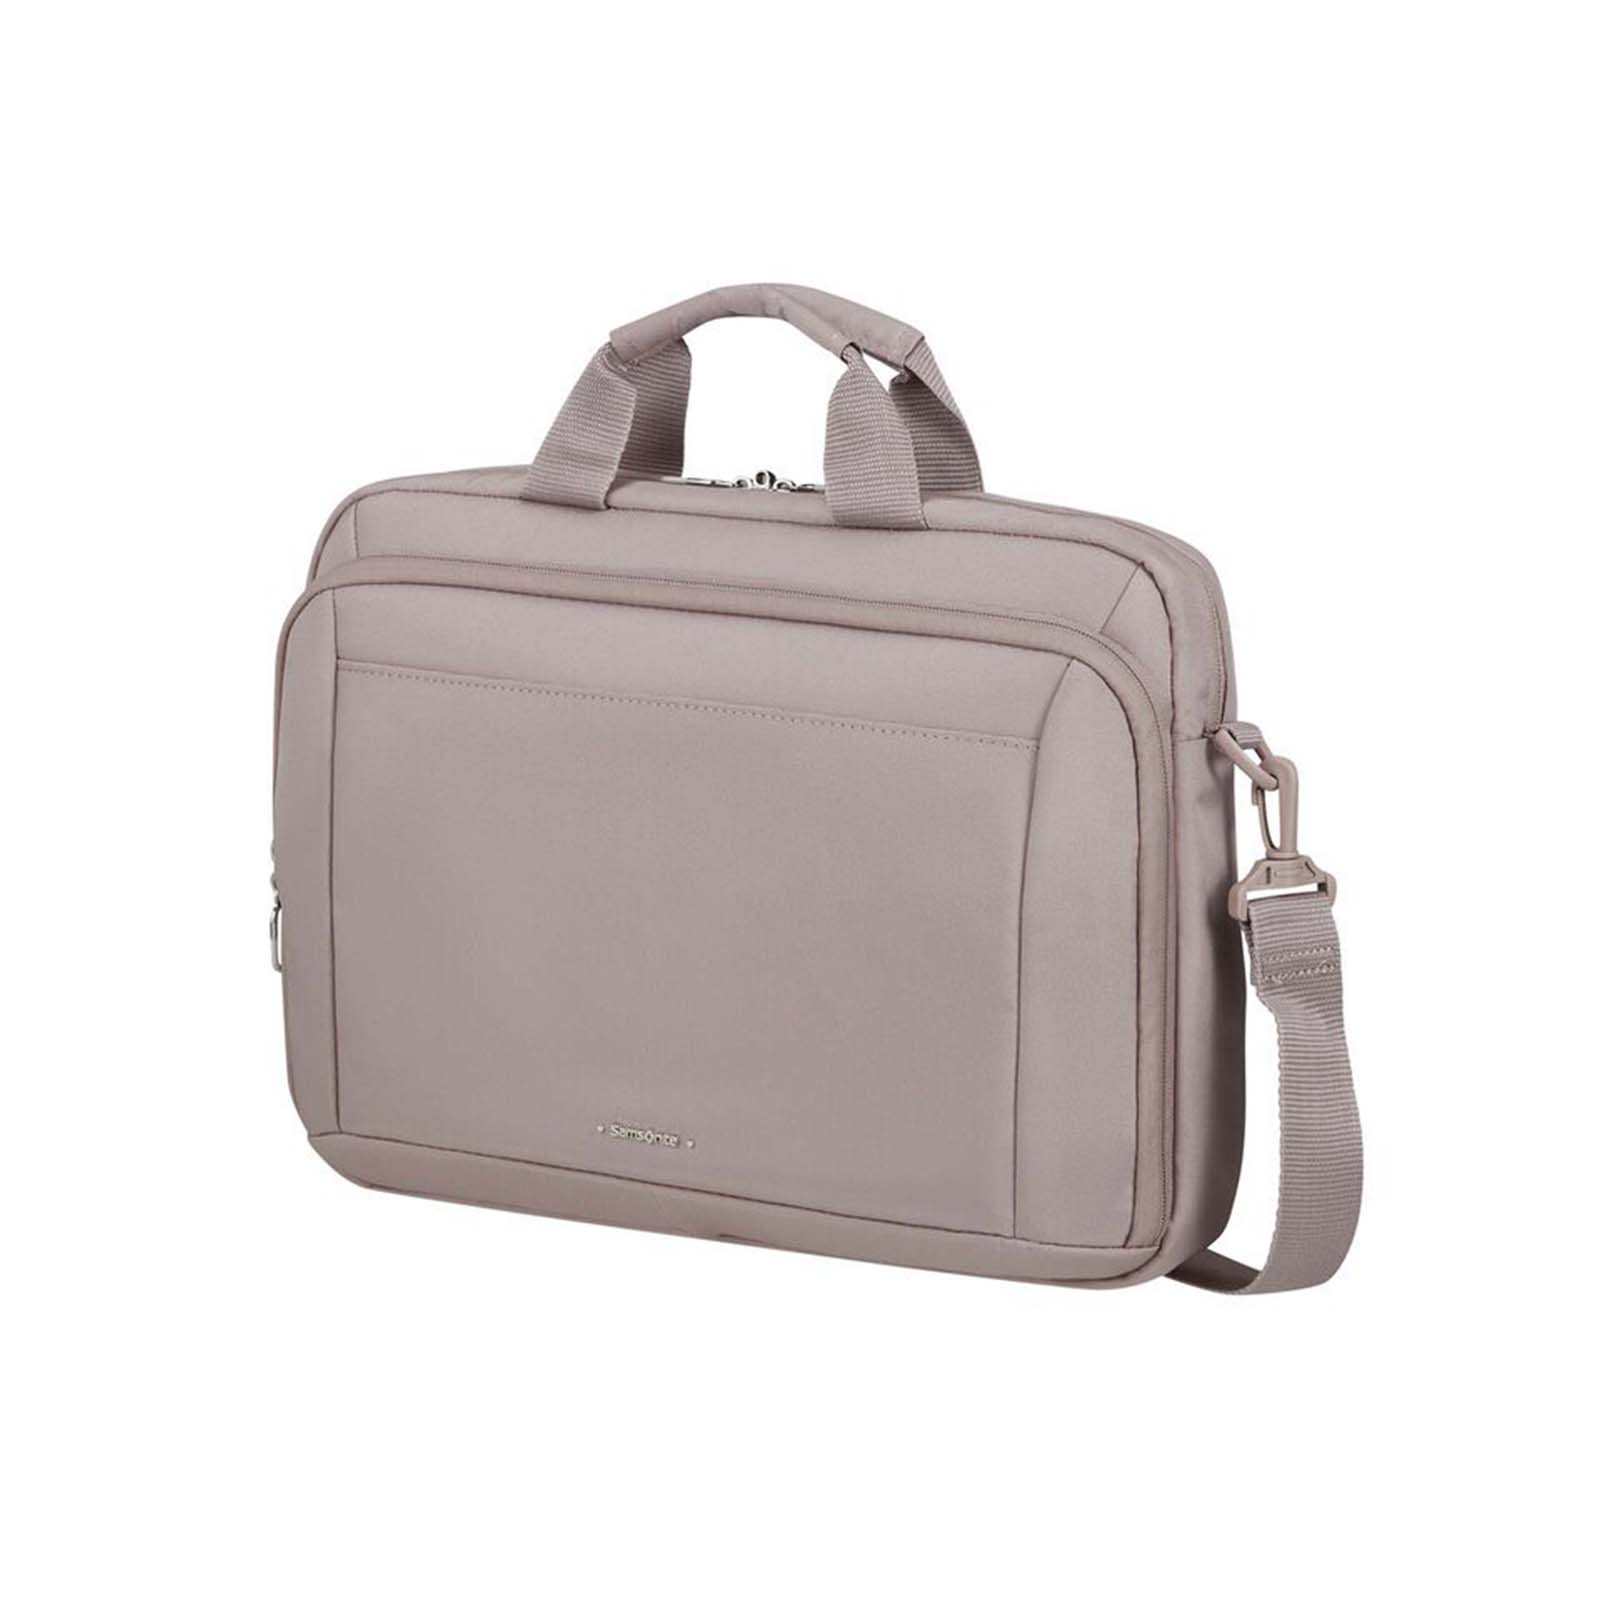 Samsonite-Guardit-Classy-15-Inch-Laptop-Bailhandle-Stone-Grey-Front-Angle